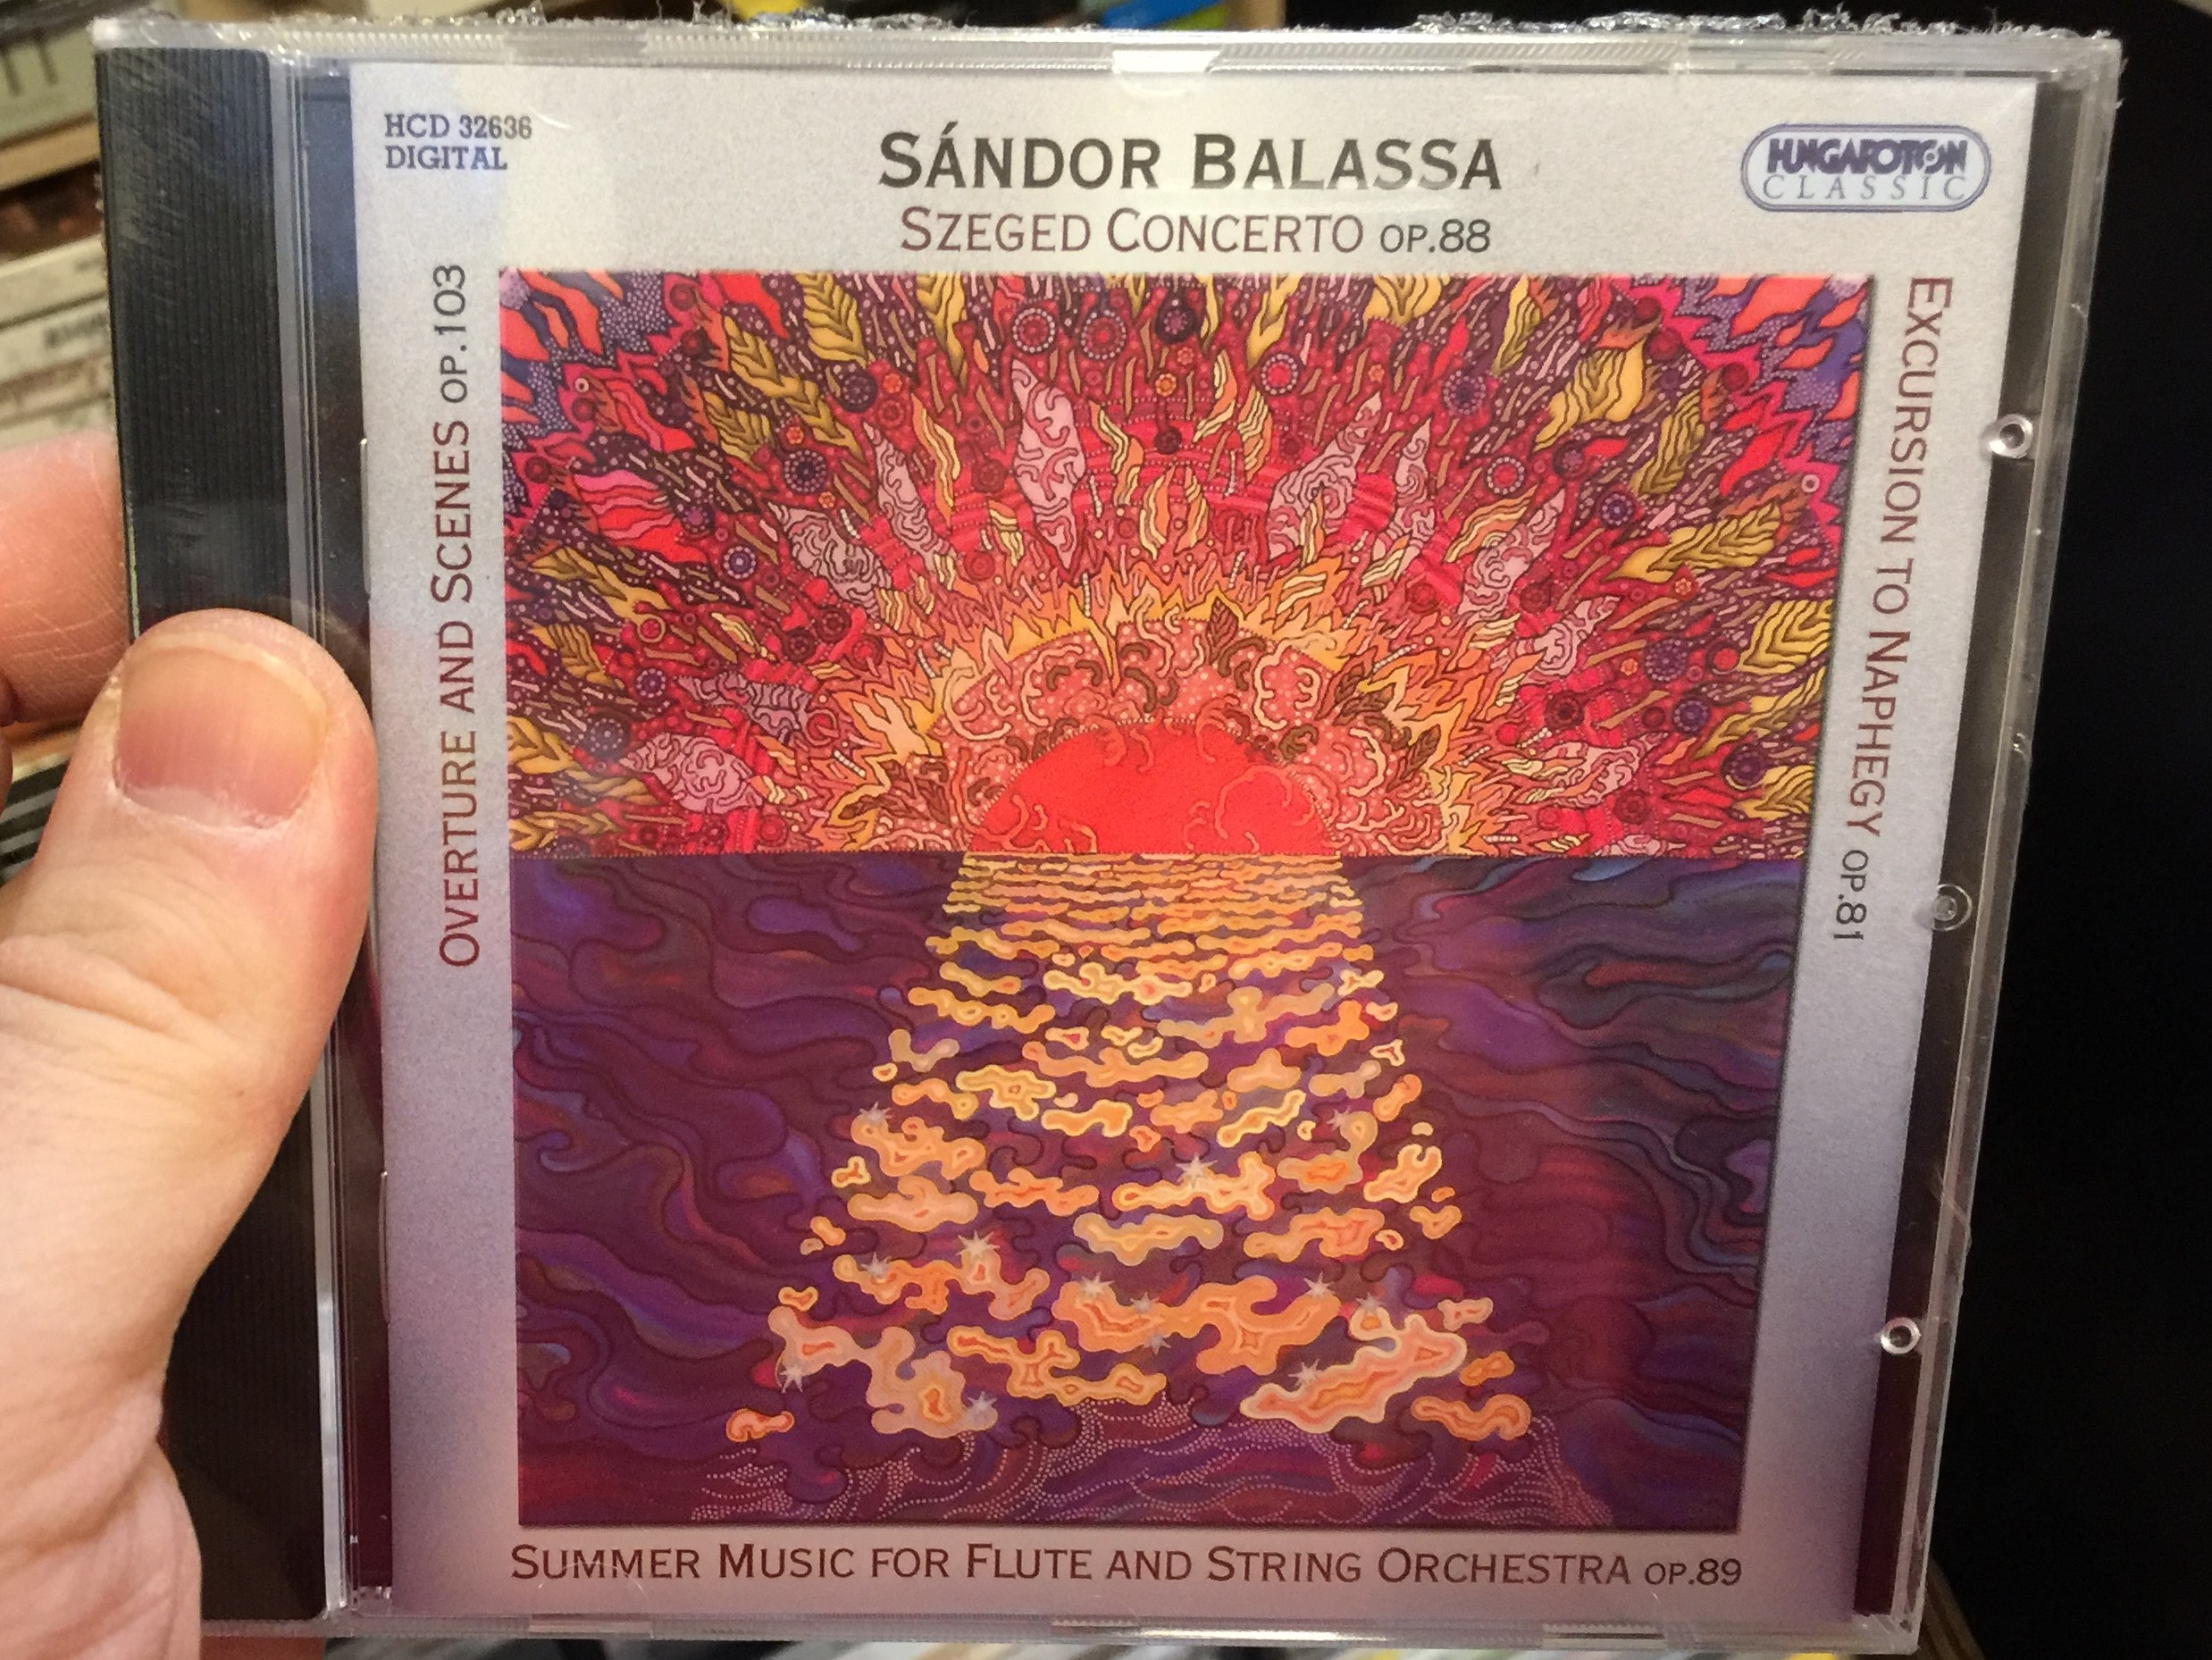 sandor-balassa-szeged-concerto-op.-88-overture-and-scenes-op.-103-excursion-to-naphegy-op.-81-summer-music-for-flute-and-string-orchestra-op.-89-hungaroton-classic-audio-cd-2010-stereo-hcd-1-.jpg